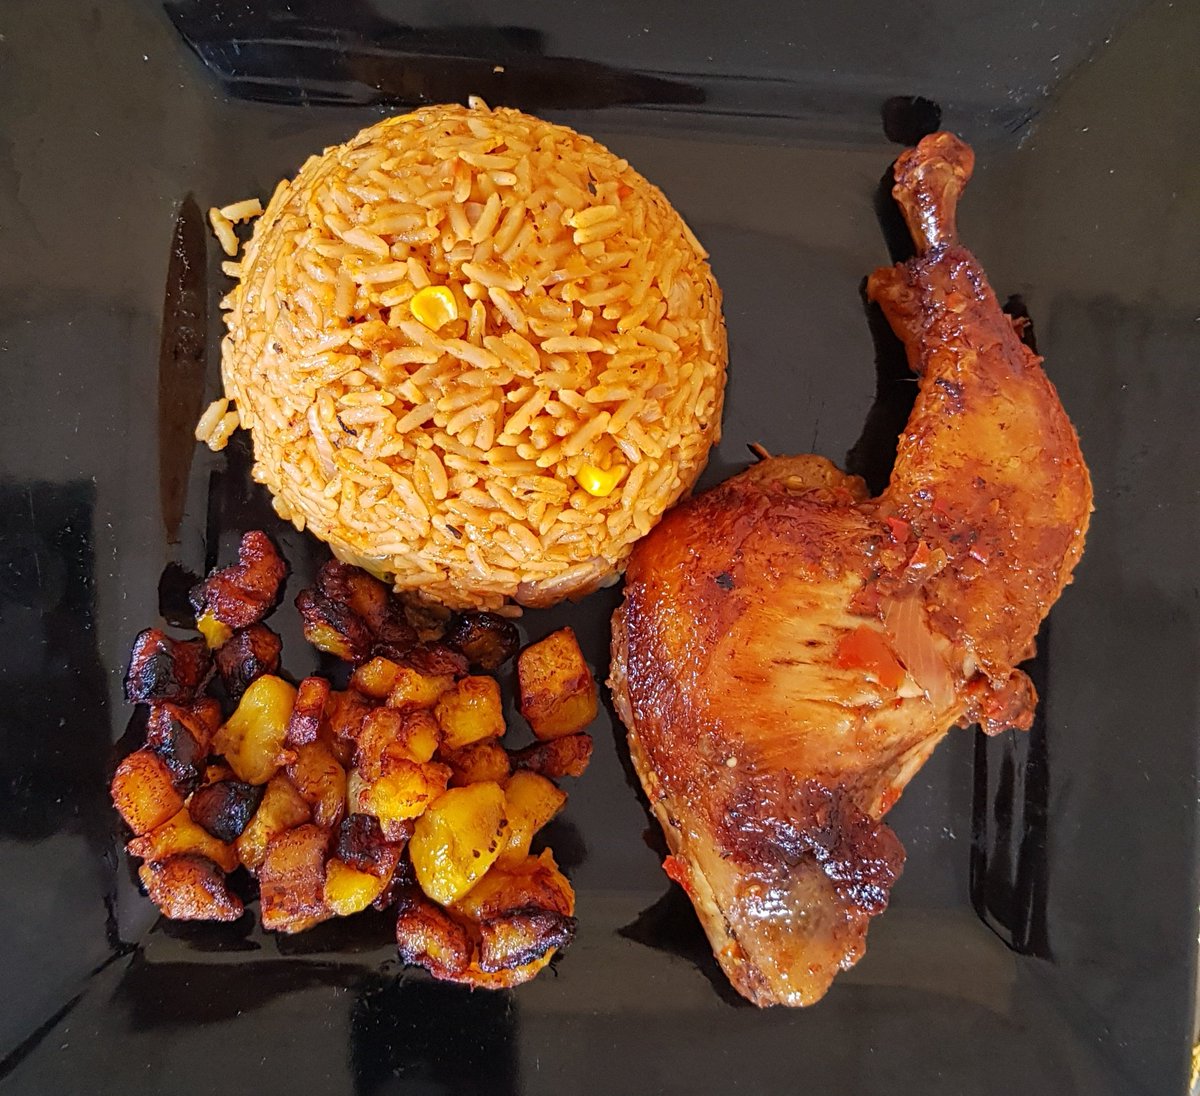 Yesterday's lunch was jollof rice, peppered chicken and fried plantain... All for #2,000 only!

Send a DM to make special orders.
Follow our TL to see our daily menus. 😊

#Foodie #nigerianbrand #nigeriancuisine #lunchinspiration #naijafoodie #madeinnigeria #HealthyLiving